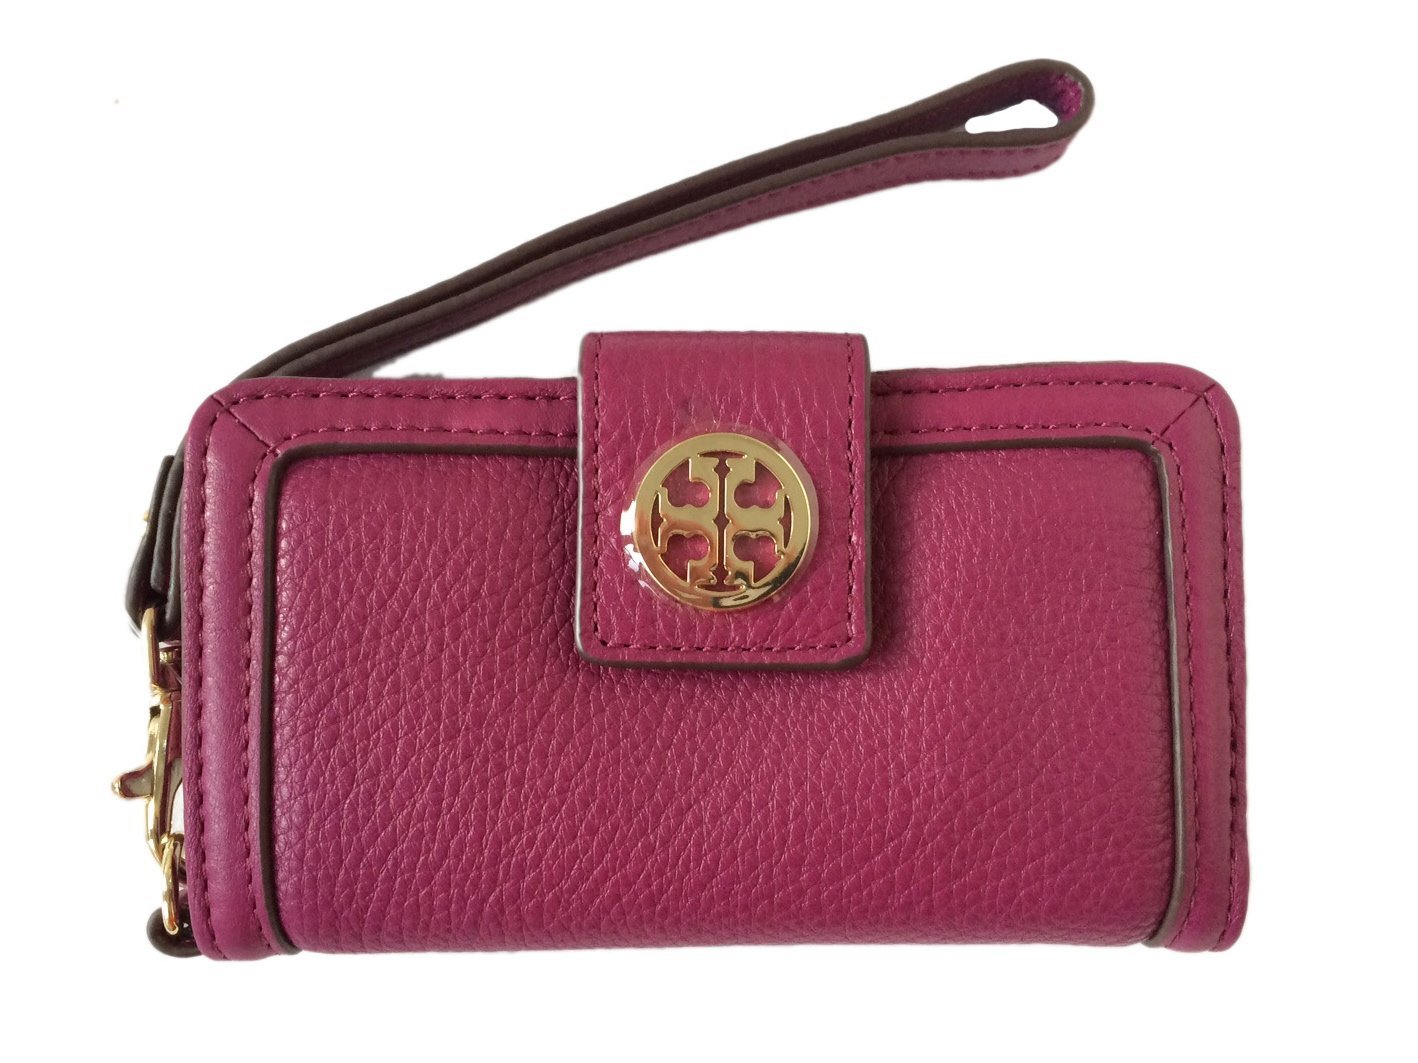 Tory Burch Amanda Smart Phone Wallet Wristlet in Fuchsia Leather (FOR iPhone 4) - $39.95